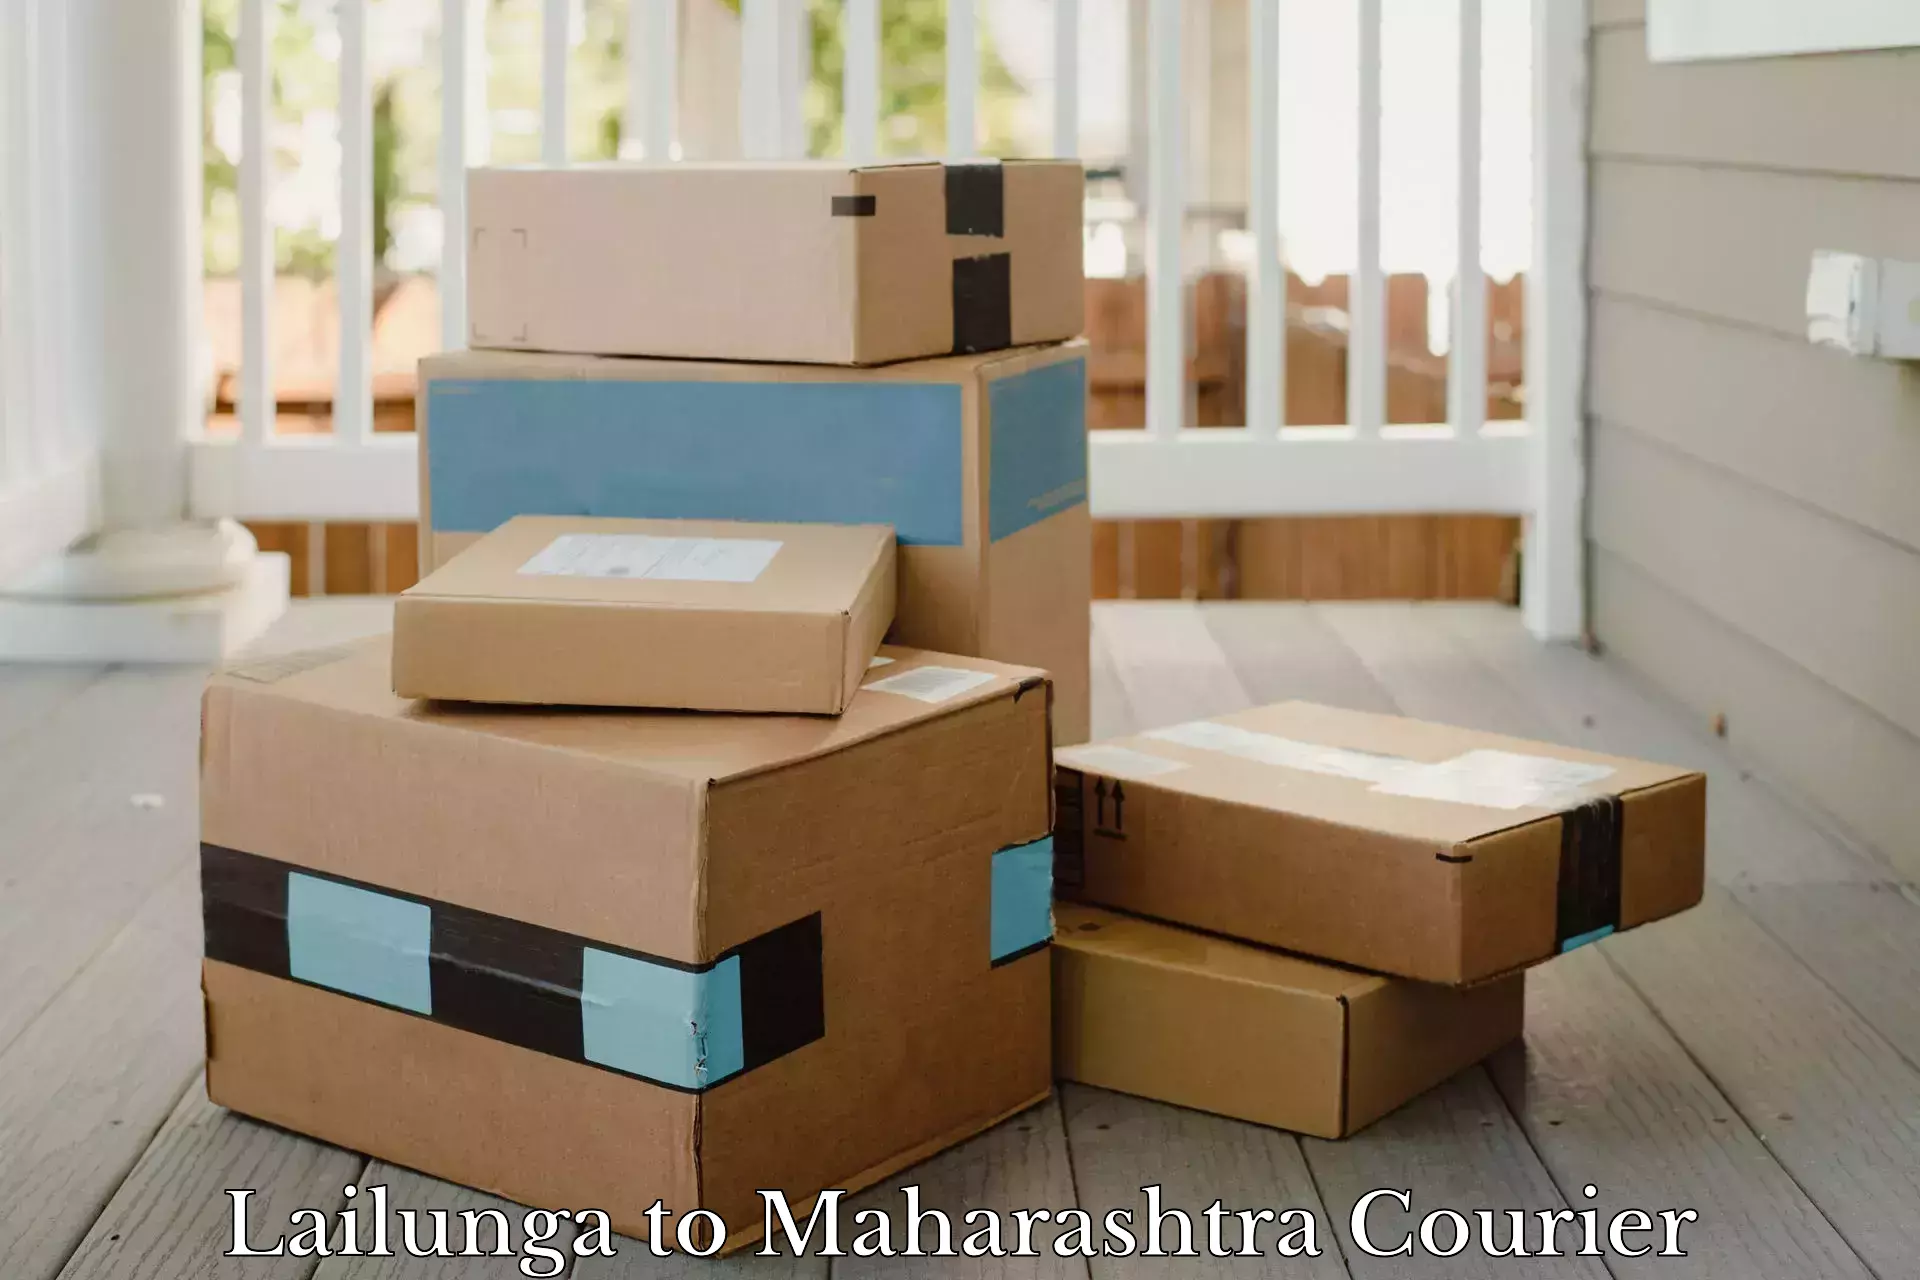 Nationwide courier service Lailunga to Dadar